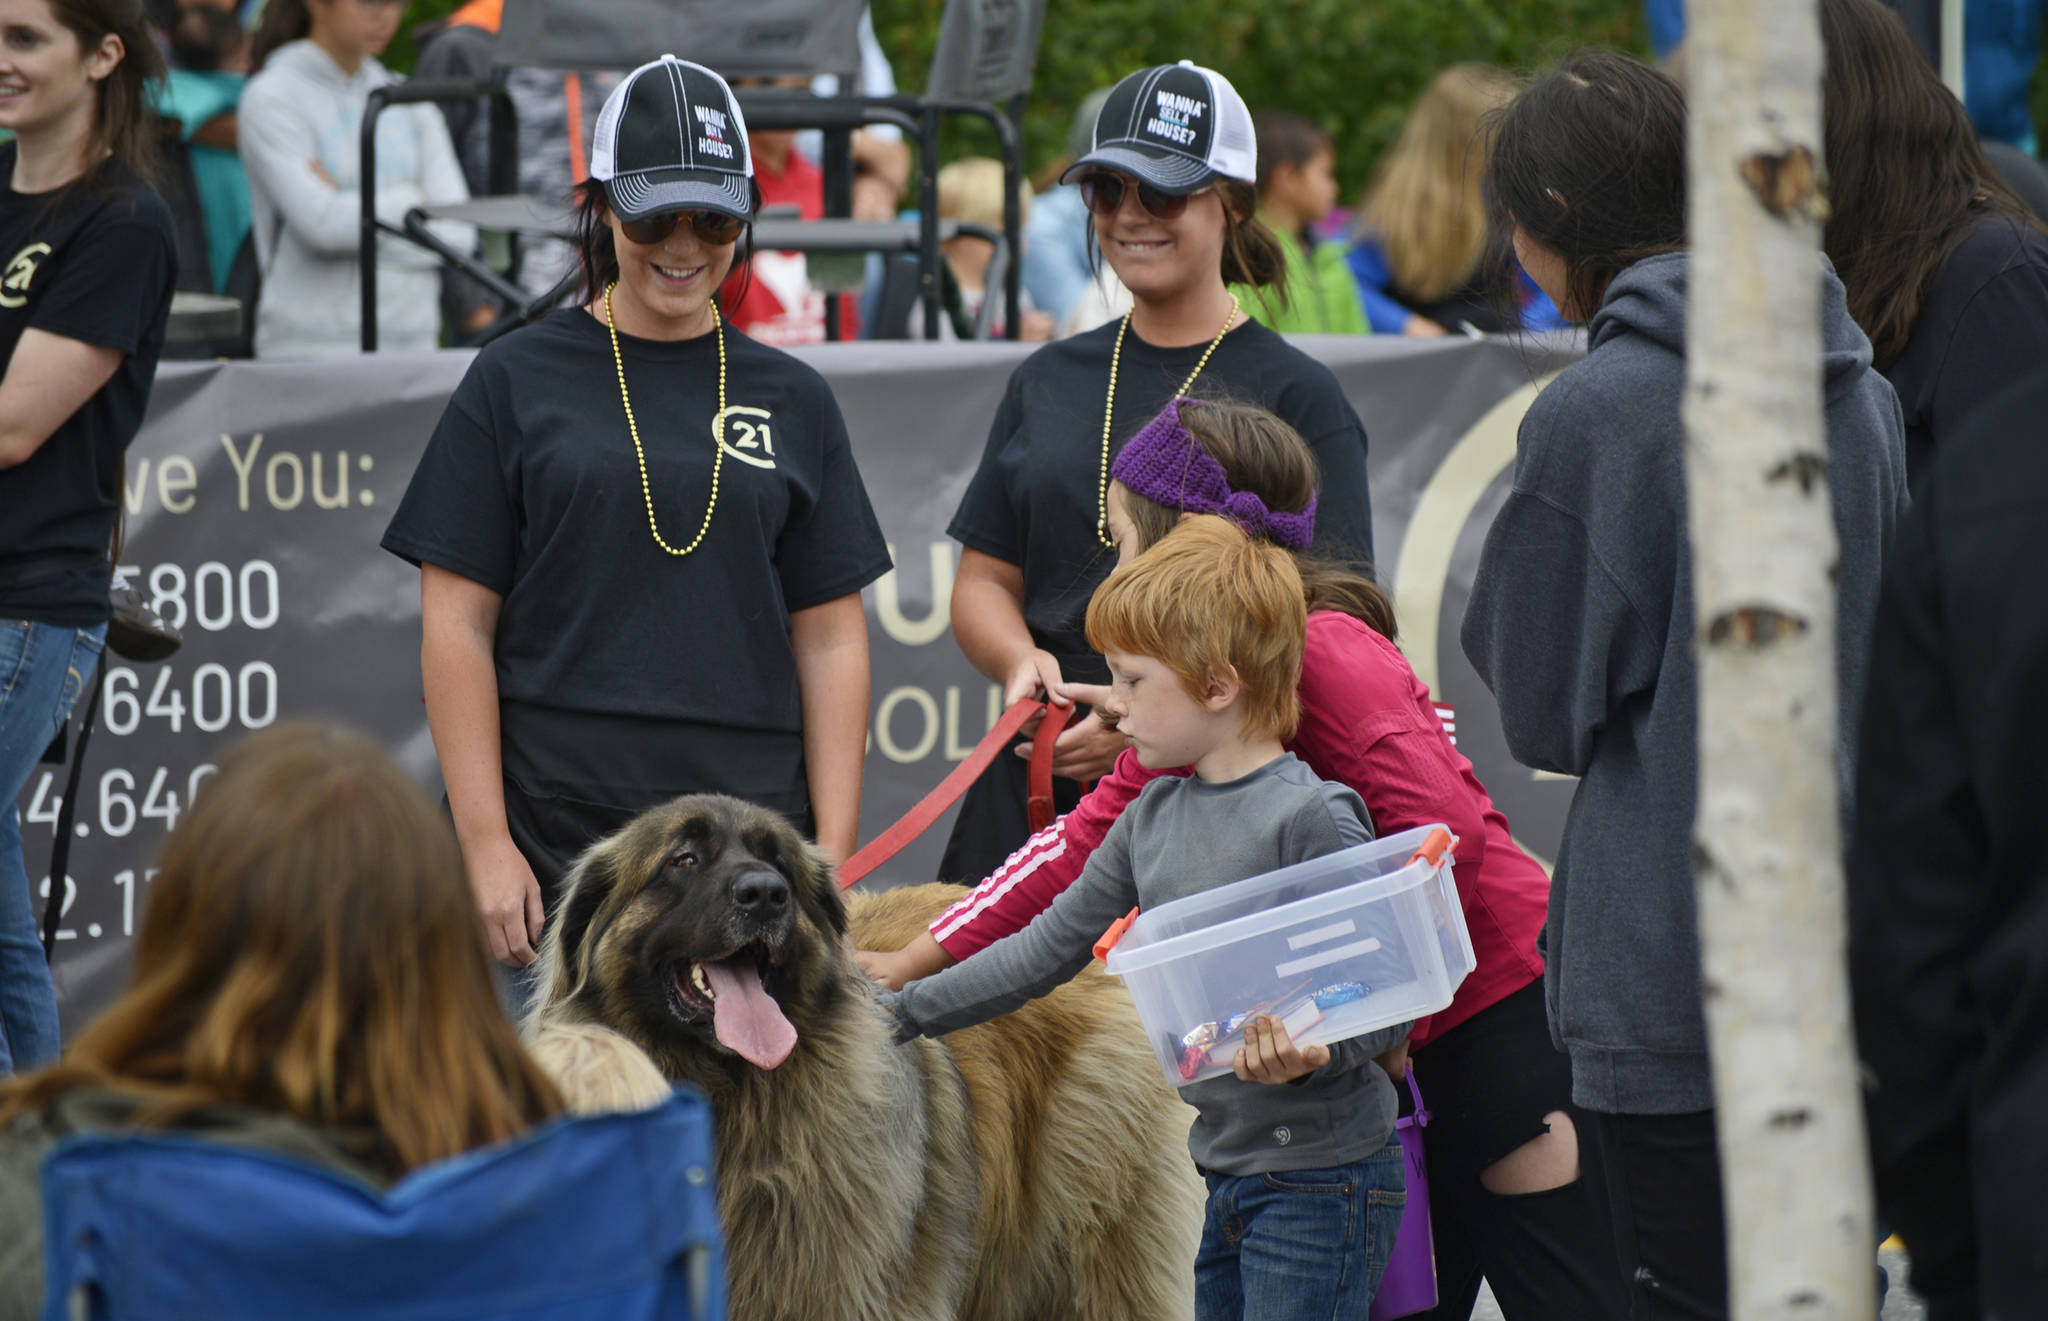 Kids flock to pet a dog with the 21st Century Realty float at the Progress Days parade on Saturday, July 28, 2018 in Soldotna, Alaska. The parade kicks off the weekend-long event celebrating Soldotna’s history, with a market on Saturday and Sunday in Soldotna Creek Park and a concert Saturday night followed by a free community barbecue Sunday. (Photo by Elizabeth Earl/Peninsula Clarion)